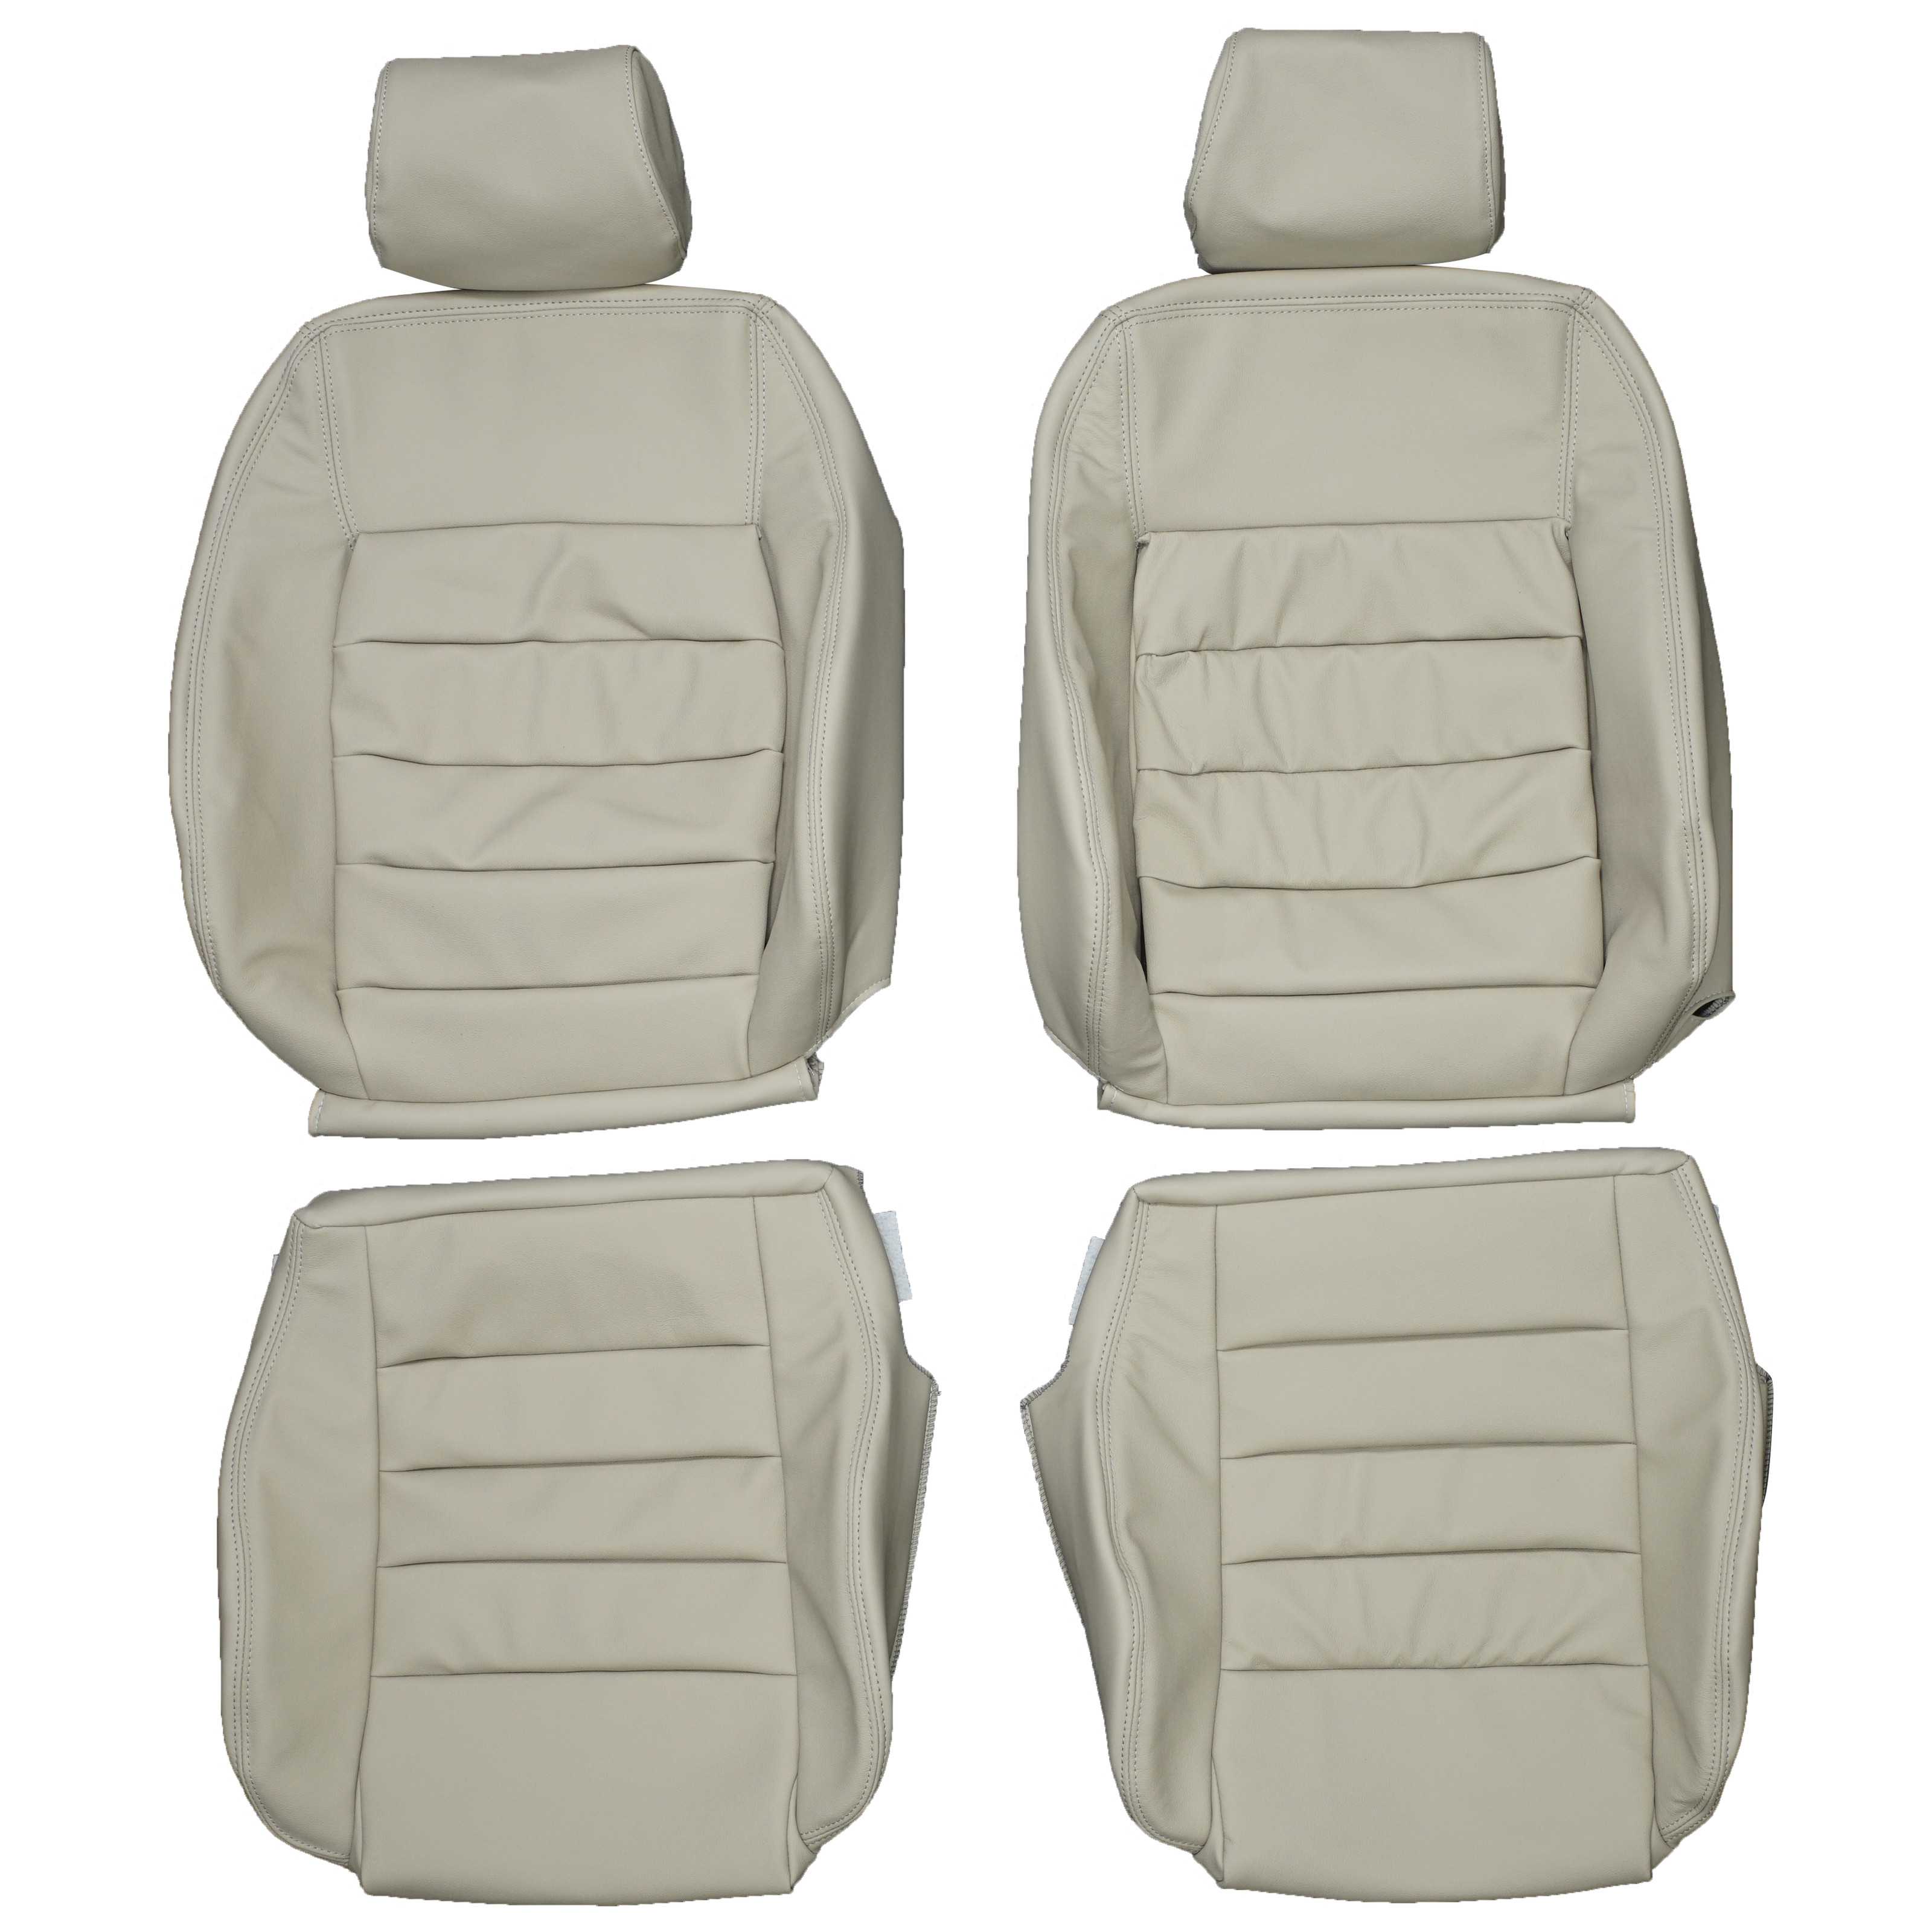 1997-2004 Audi A6 C5 Sport Custom Real Leather Seat Covers (Front) -  Lseat.com